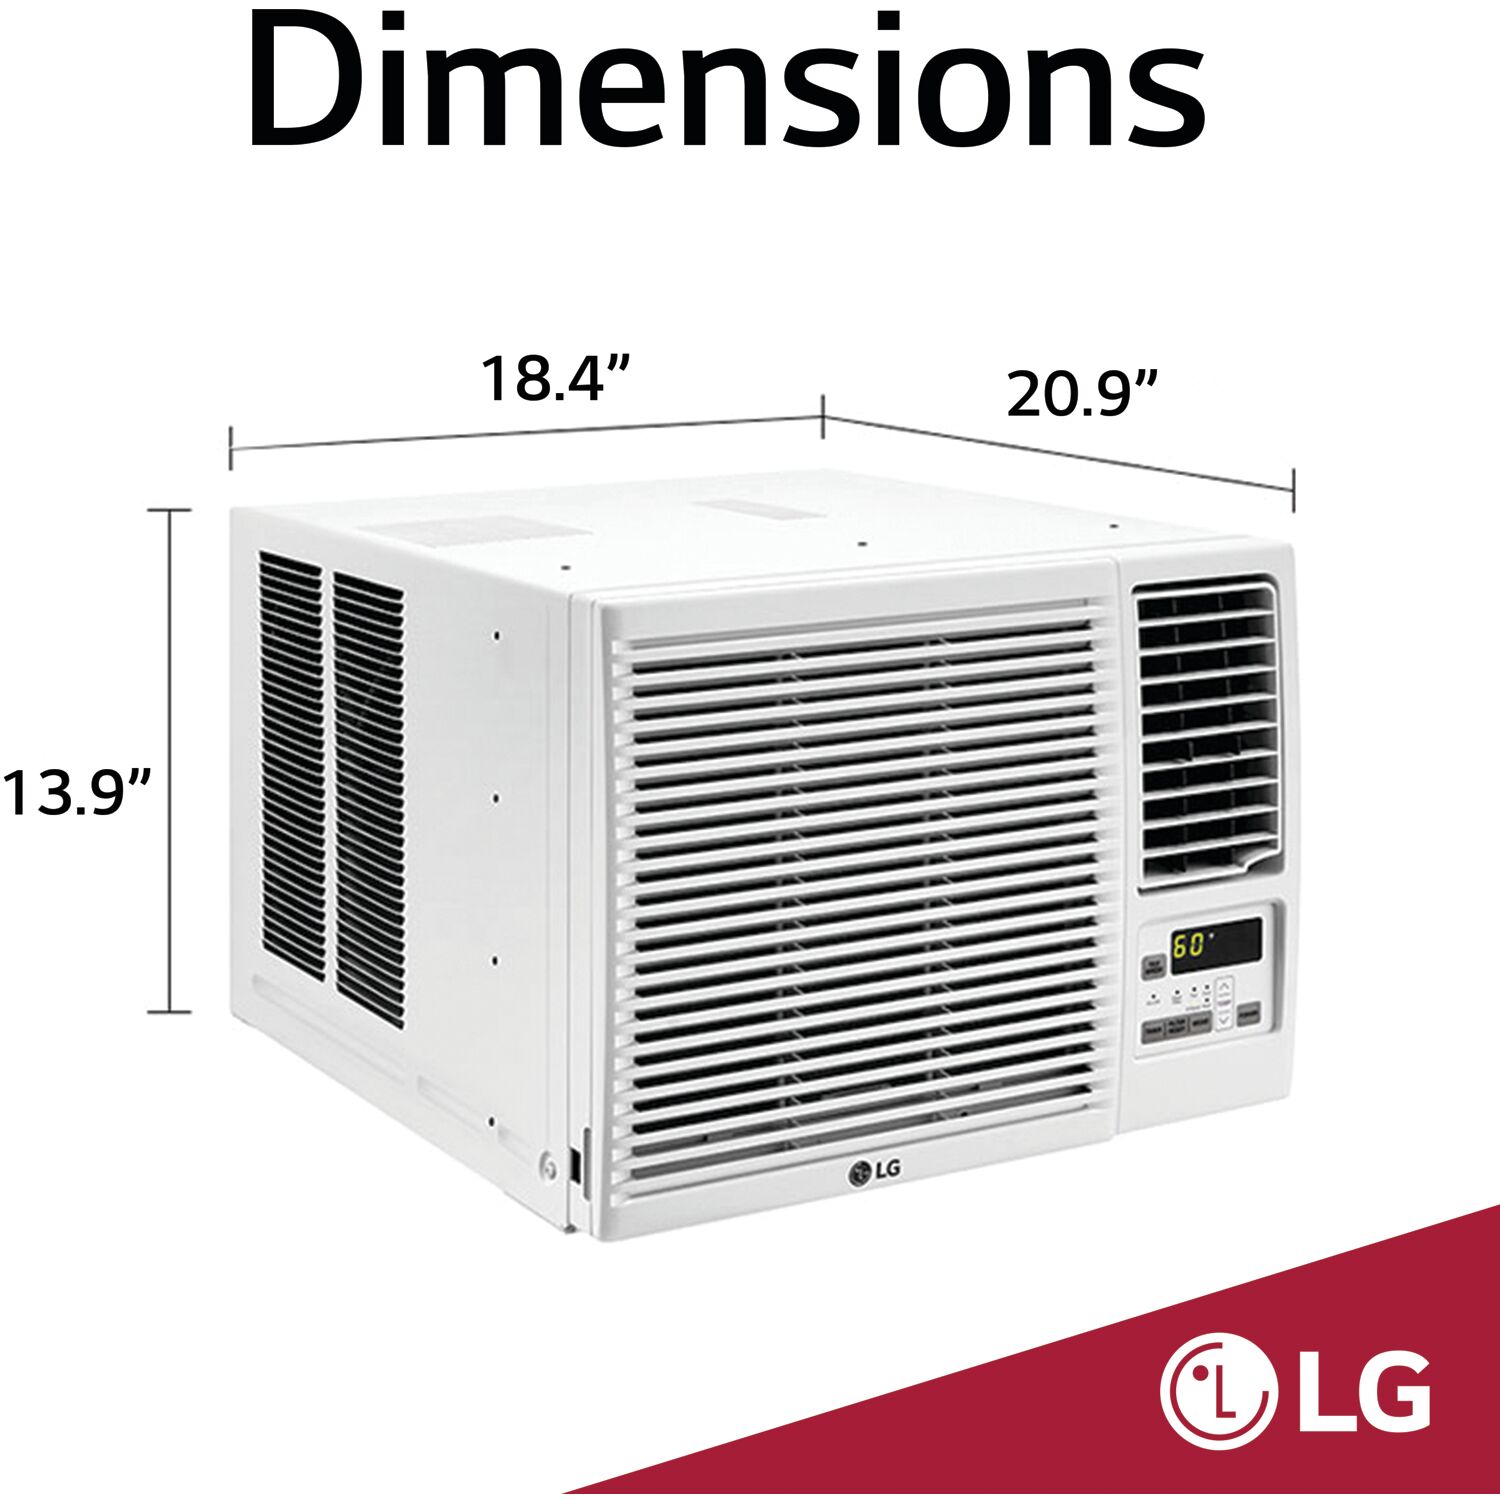 LG 7,500 BTU 115V Window-Mounted Air Conditioner with 3,850 BTU Supplemental Heat Function - image 4 of 11